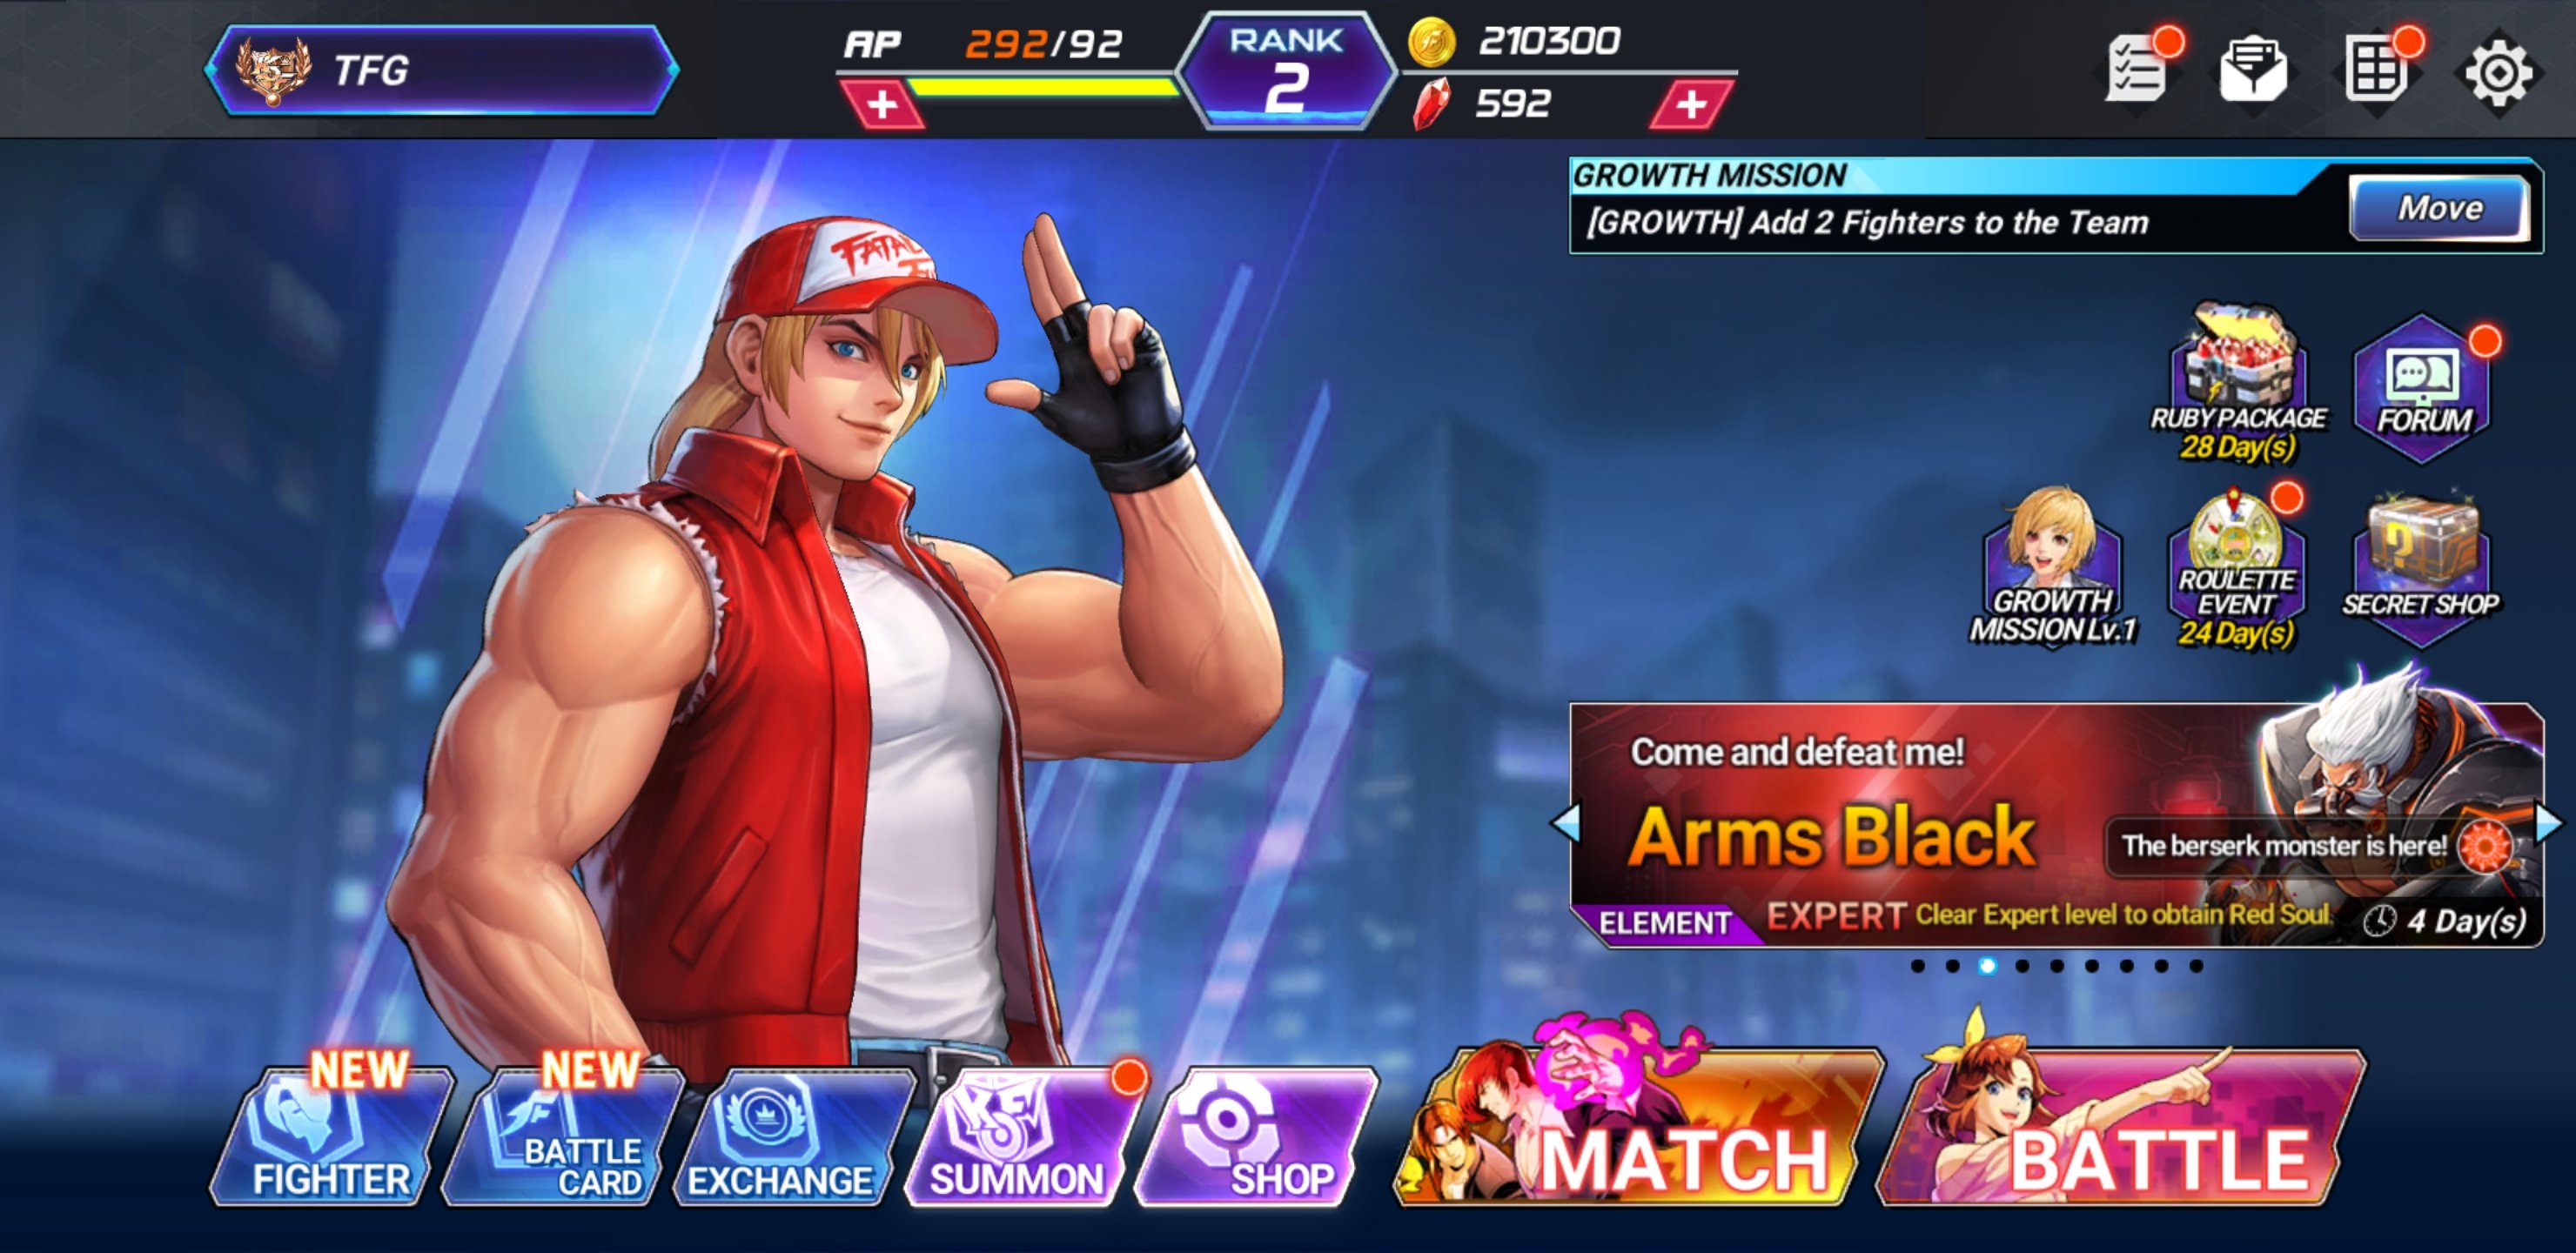 Netmarble Opens Pre-Registration For the King Of Fighters Allstar